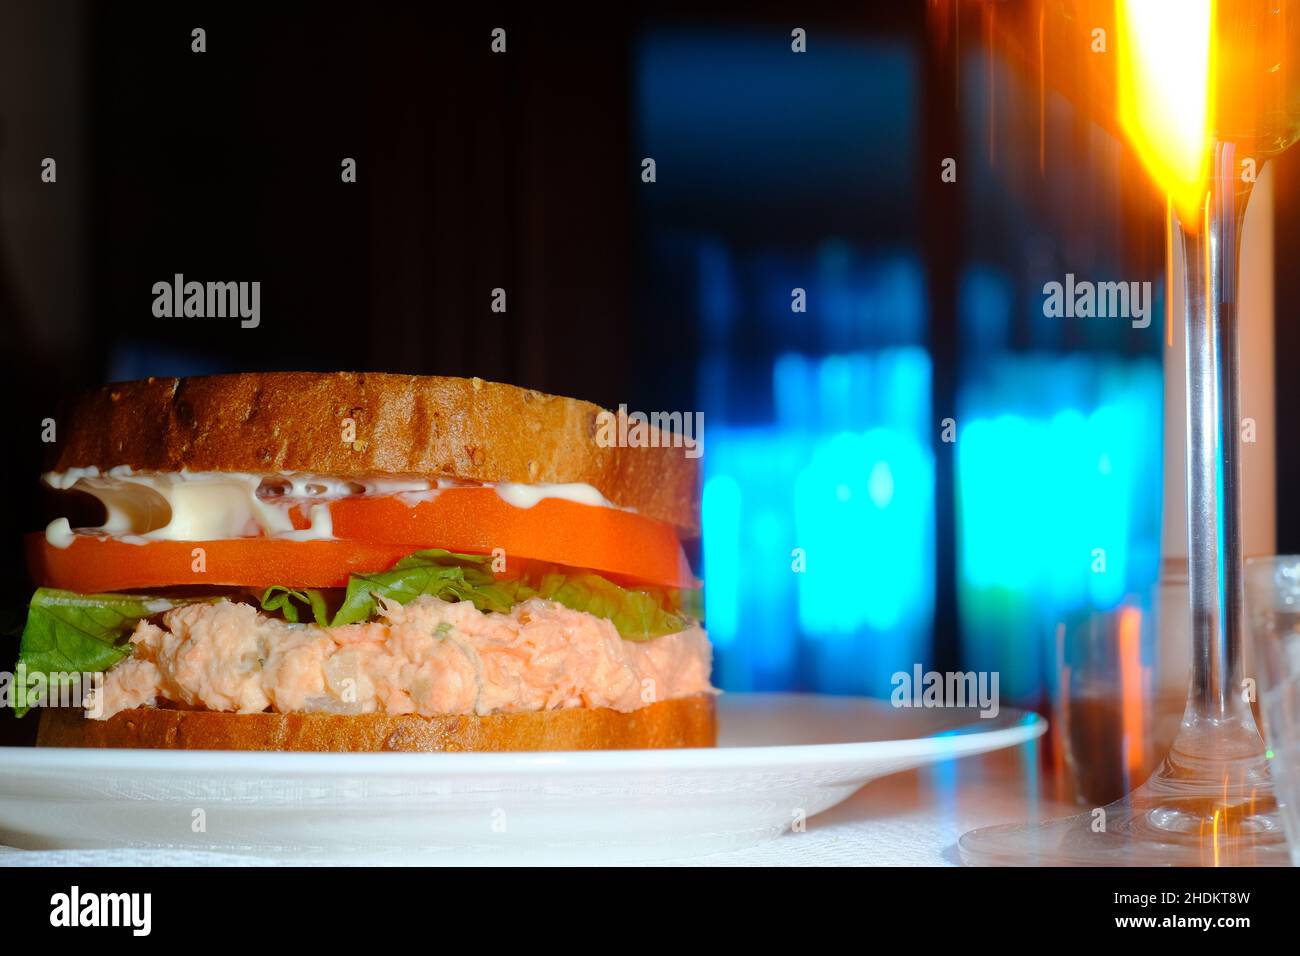 Pink salmon salad sandwich with mayonnaise at fancy restaurant Stock Photo